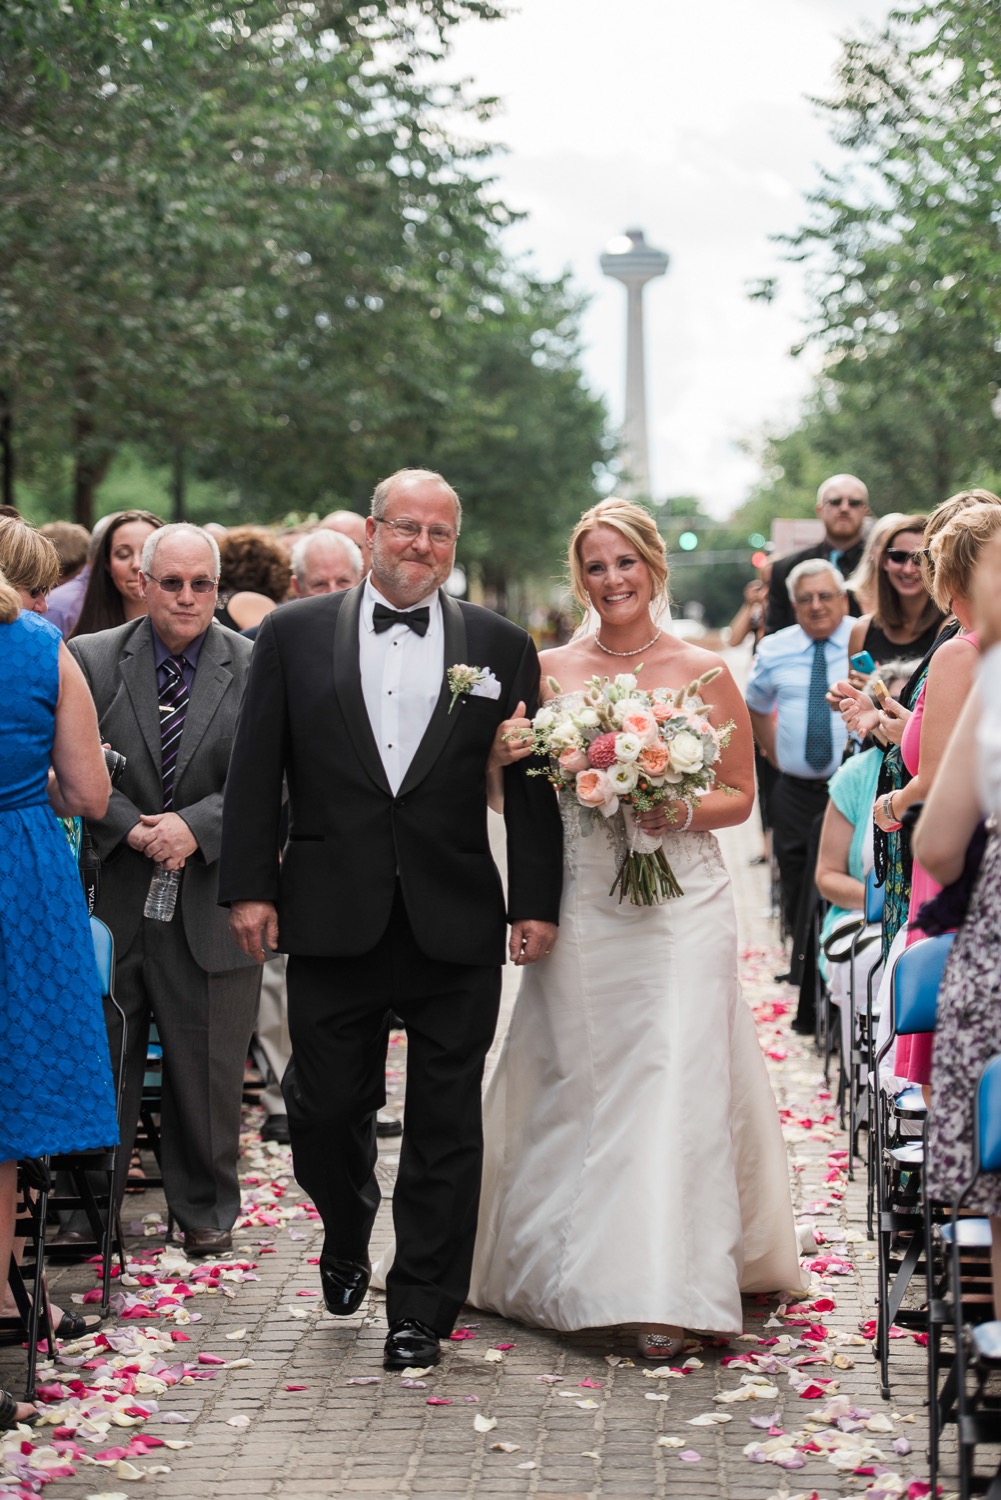 A bride walks down the aisle with her dad in Niagara Falls, NY